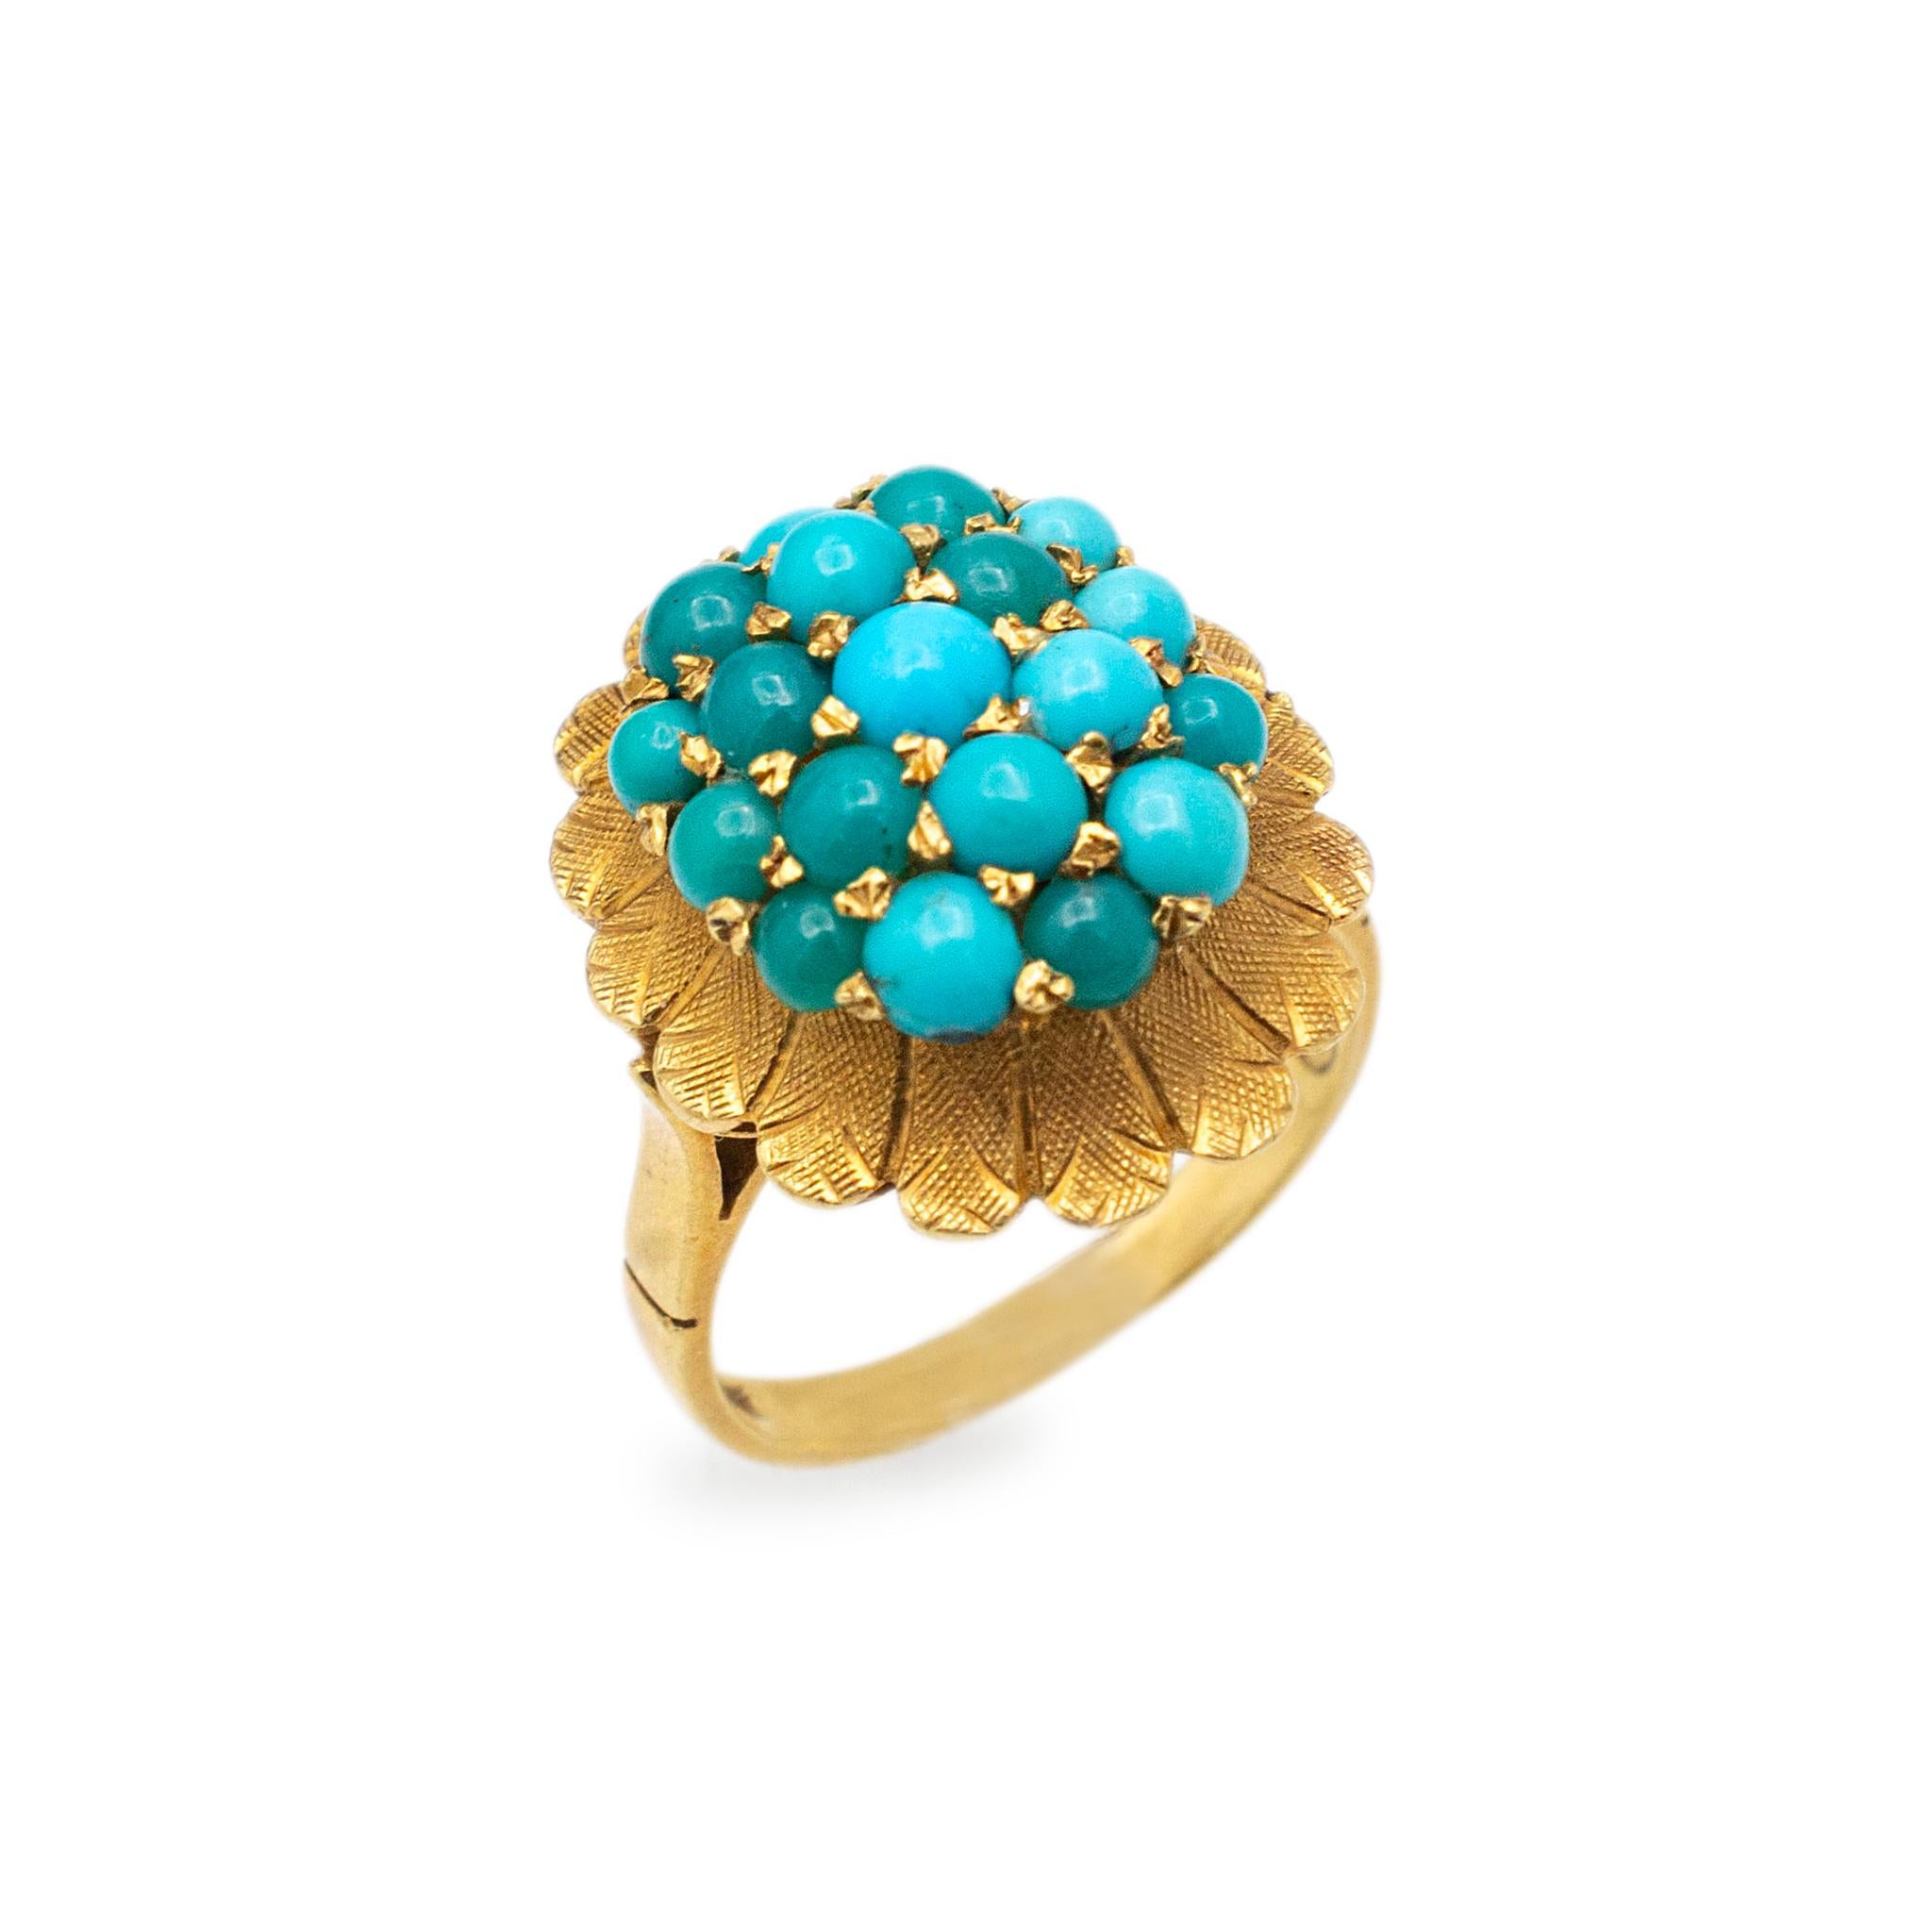 Gender: Ladies

Metal Type: 18K Yellow Gold

Size: 6

Head measurements: 20.00mm x 16.90mm

Weight: 6.86 grams

Ladies 18K yellow gold turquoise vintage cocktail ring with a half round shank. Engraved with 